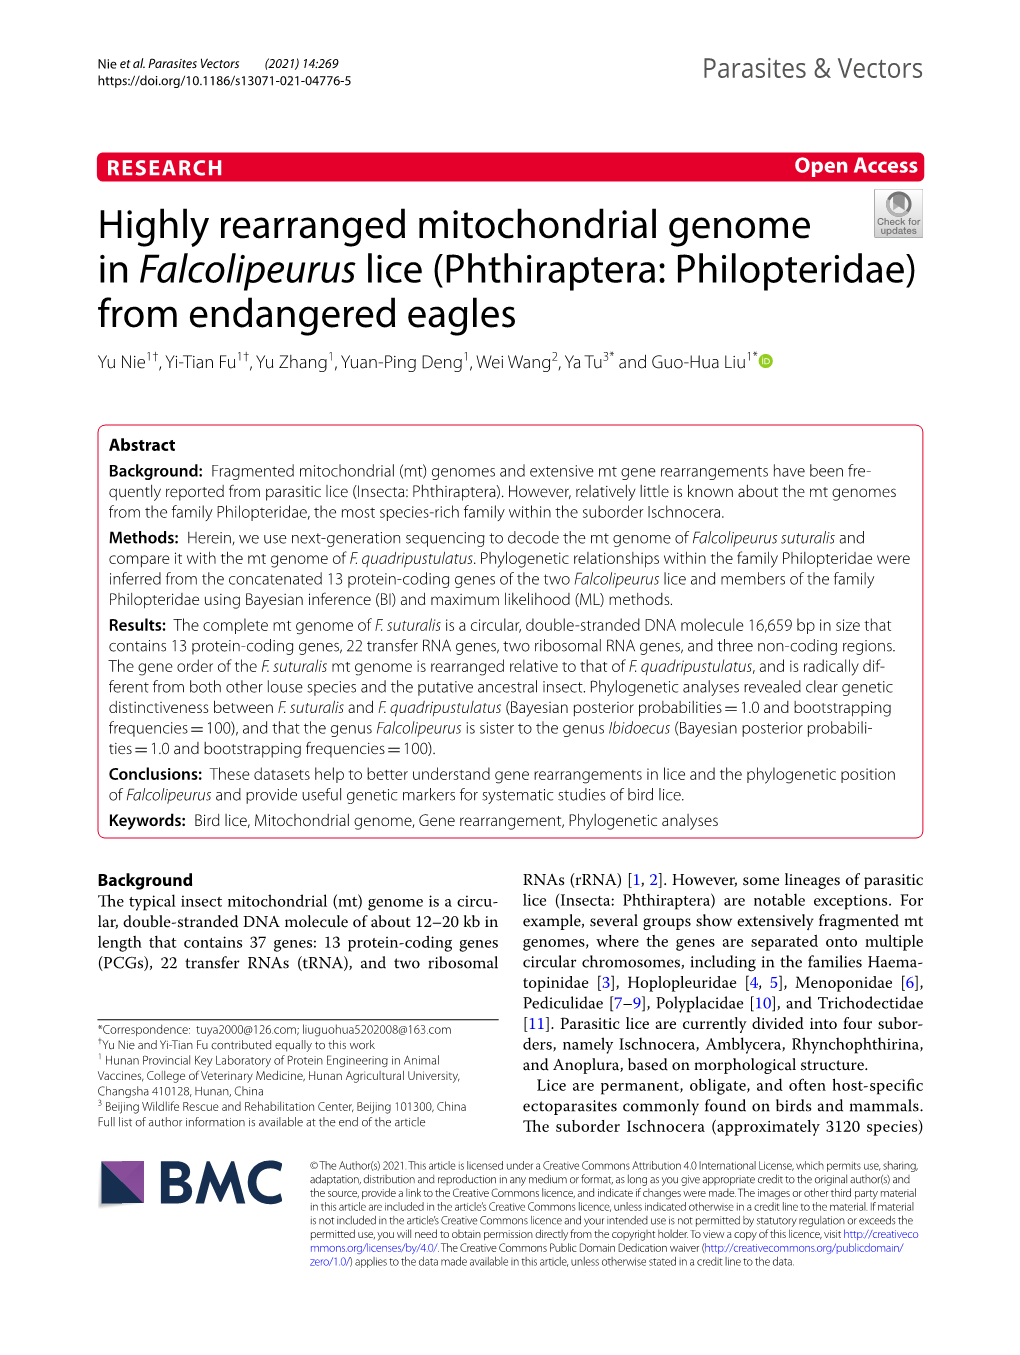 Highly Rearranged Mitochondrial Genome in Falcolipeurus Lice (Phthiraptera: Philopteridae) from Endangered Eagles